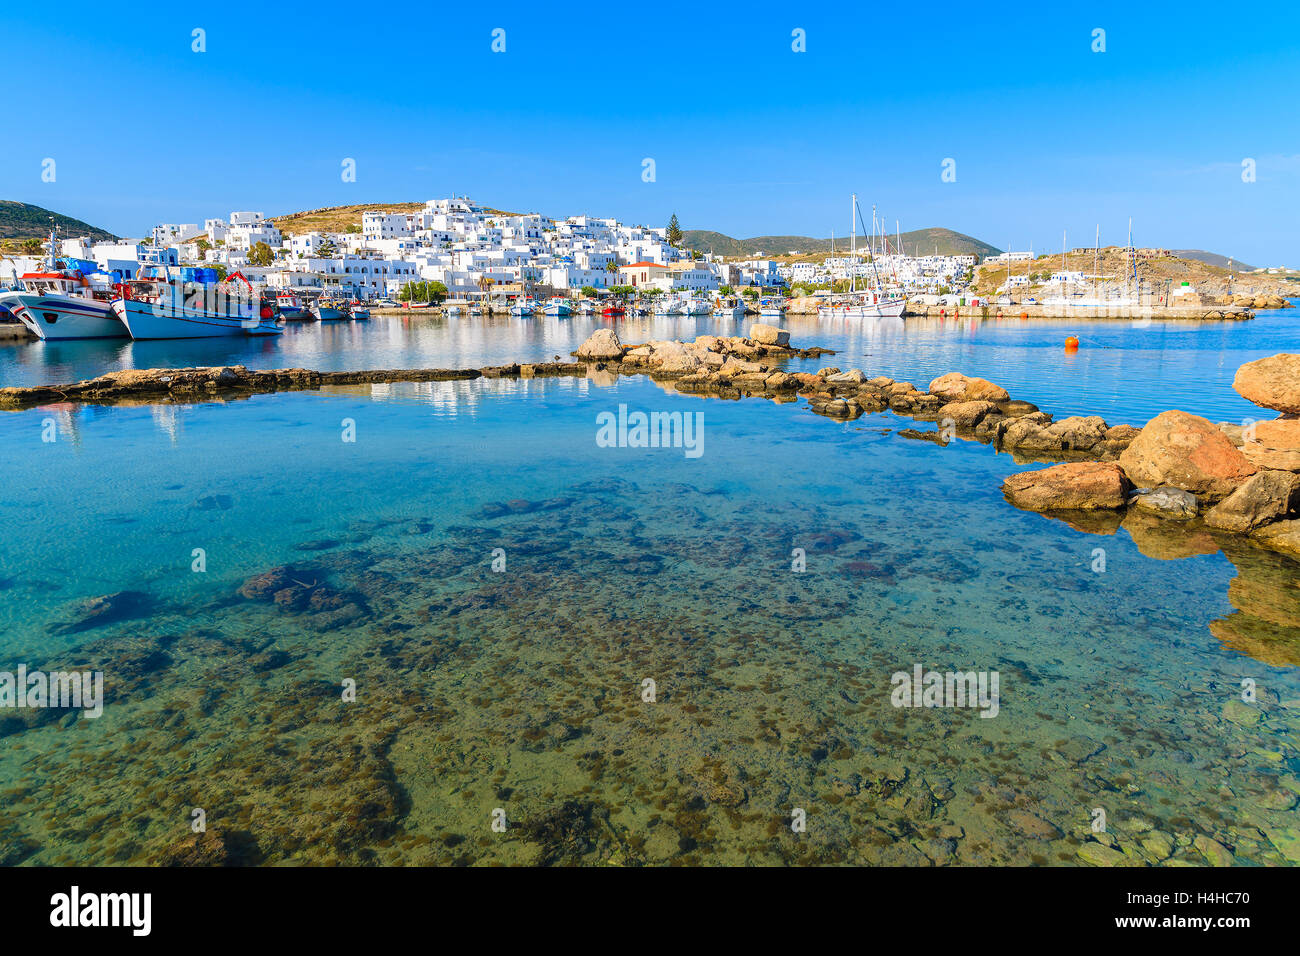 A view of Naoussa fishing port at sunset time, Paros island, Cyclades, Greece Stock Photo